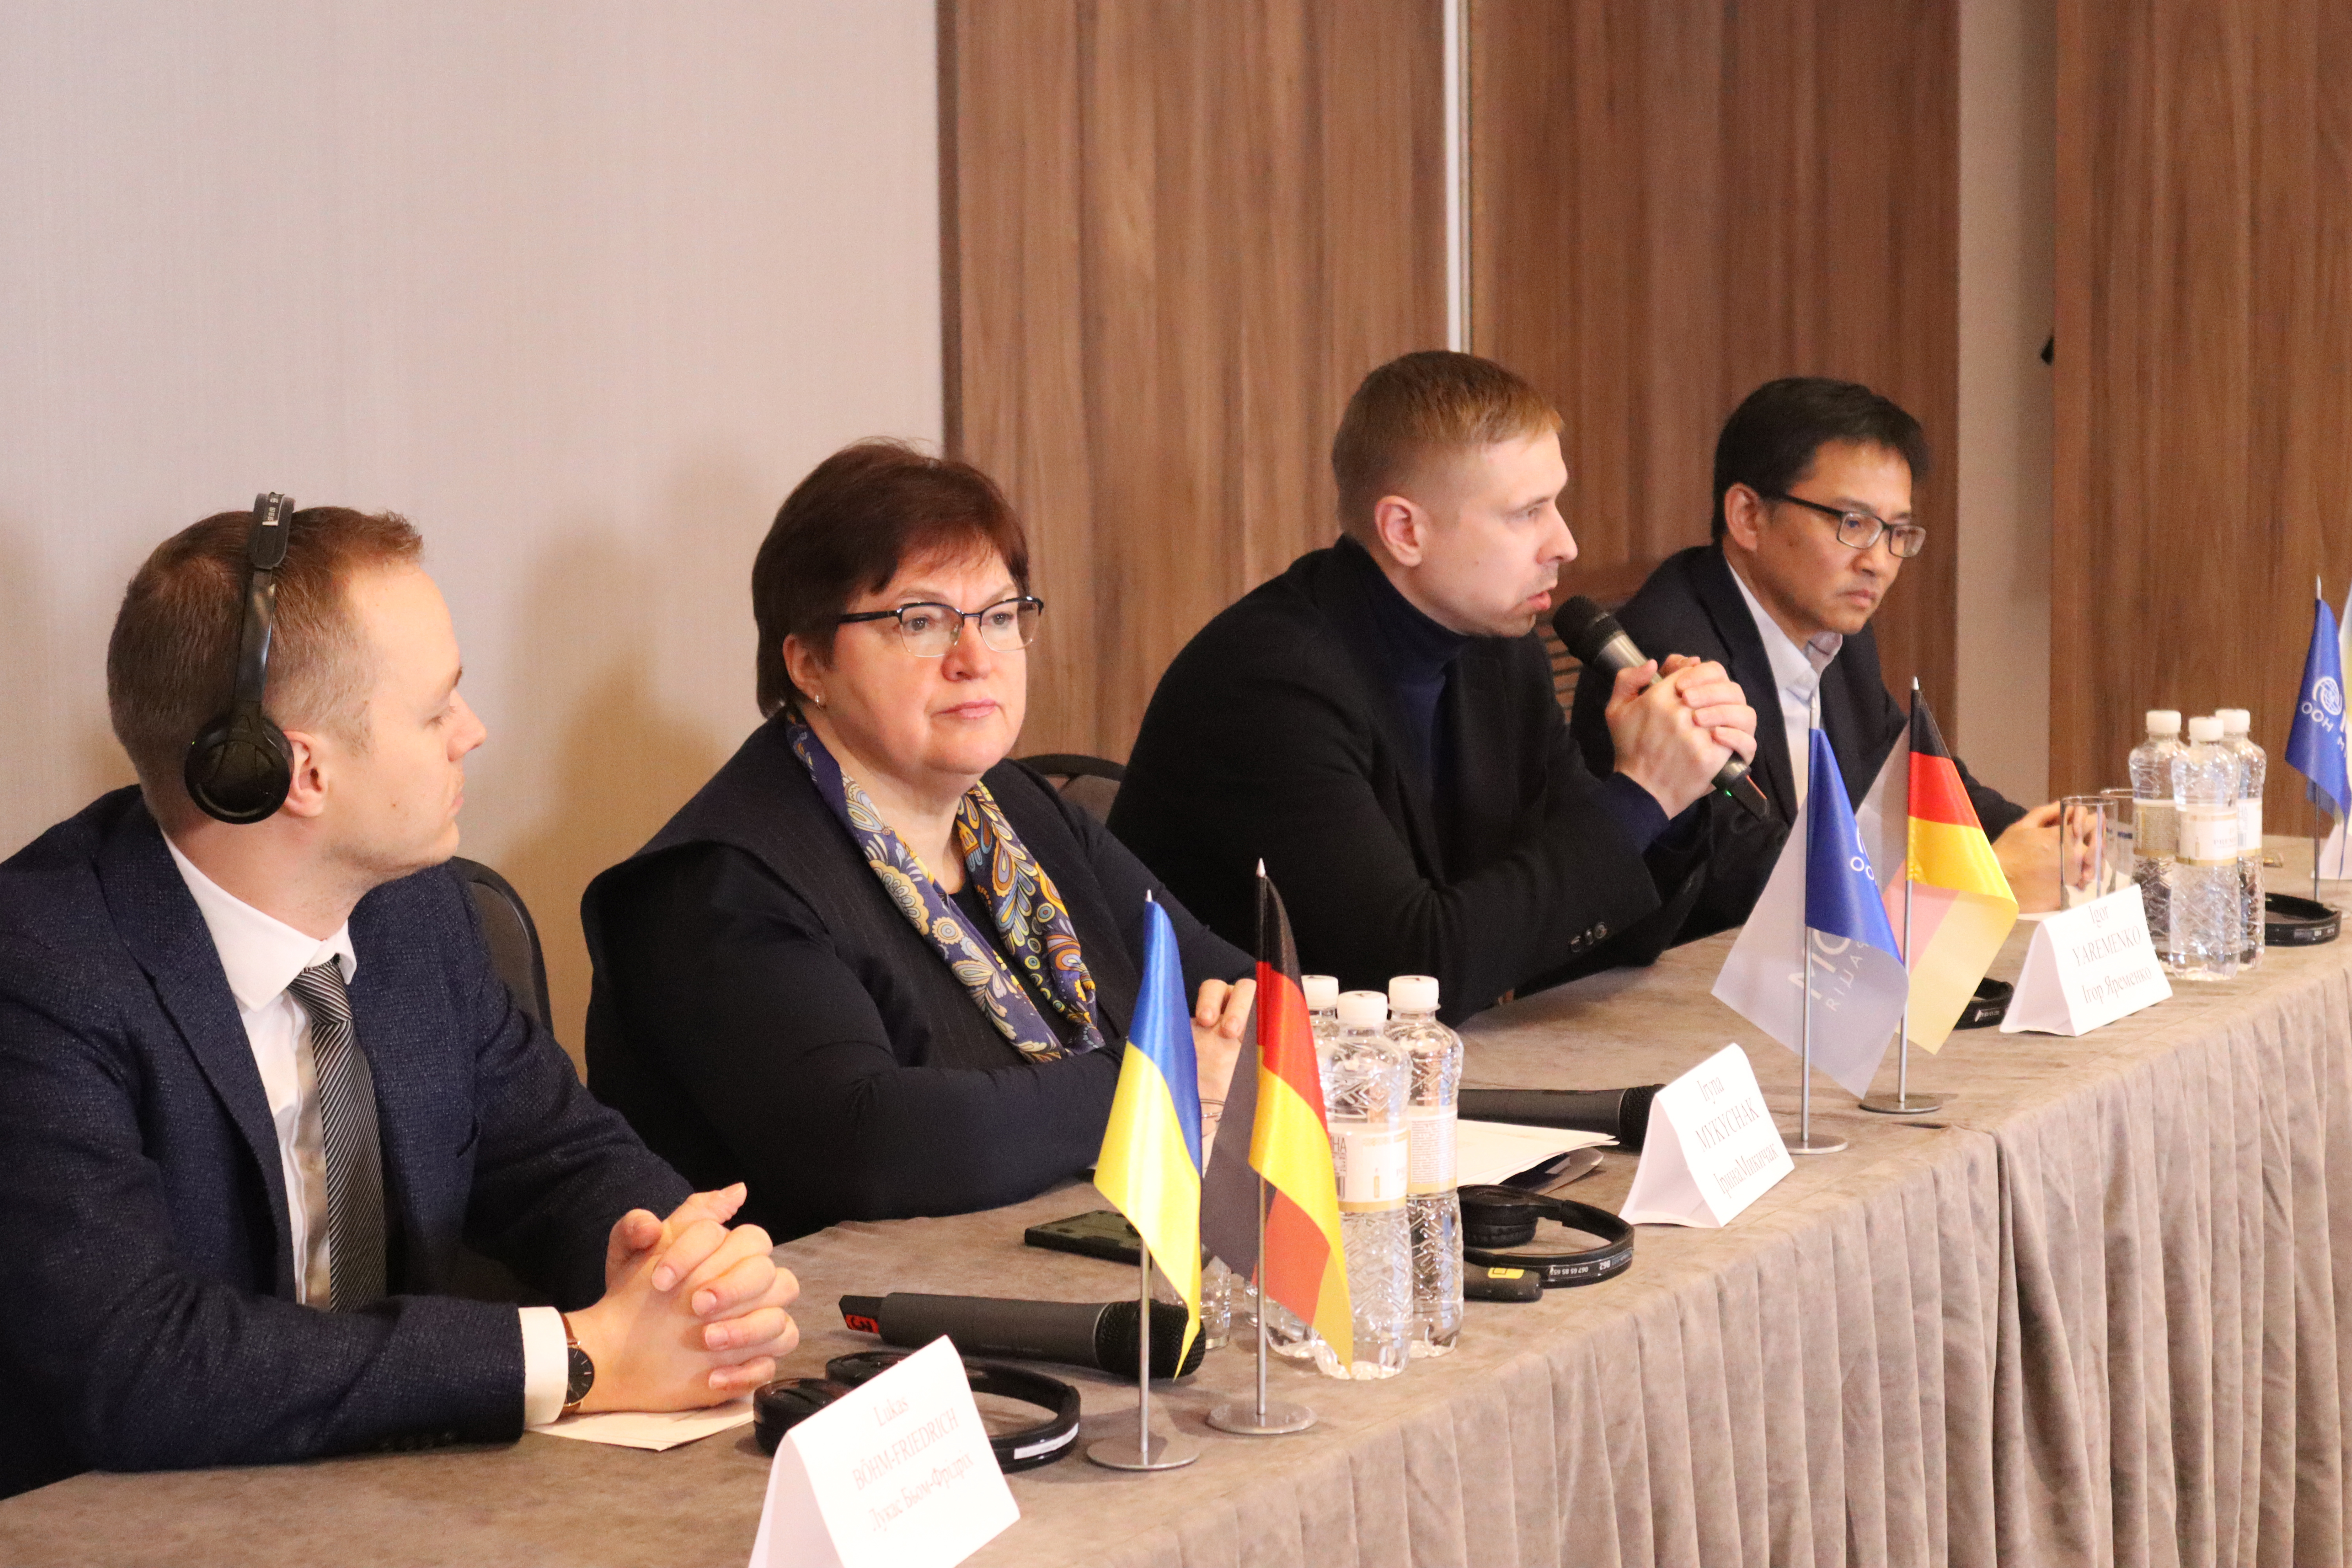 From left to right: Second Secretary Political with the German Embassy in Ukraine Lukas Böhm-Friedrich, Deputy Minister of Health in Ukraine Iryna Mykychak, Deputy Minister of Veterans Affairs in Ukraine on European Integration Ihor Yaremenko, and IOM Ukraine Chief of Mission Anh Nguyen